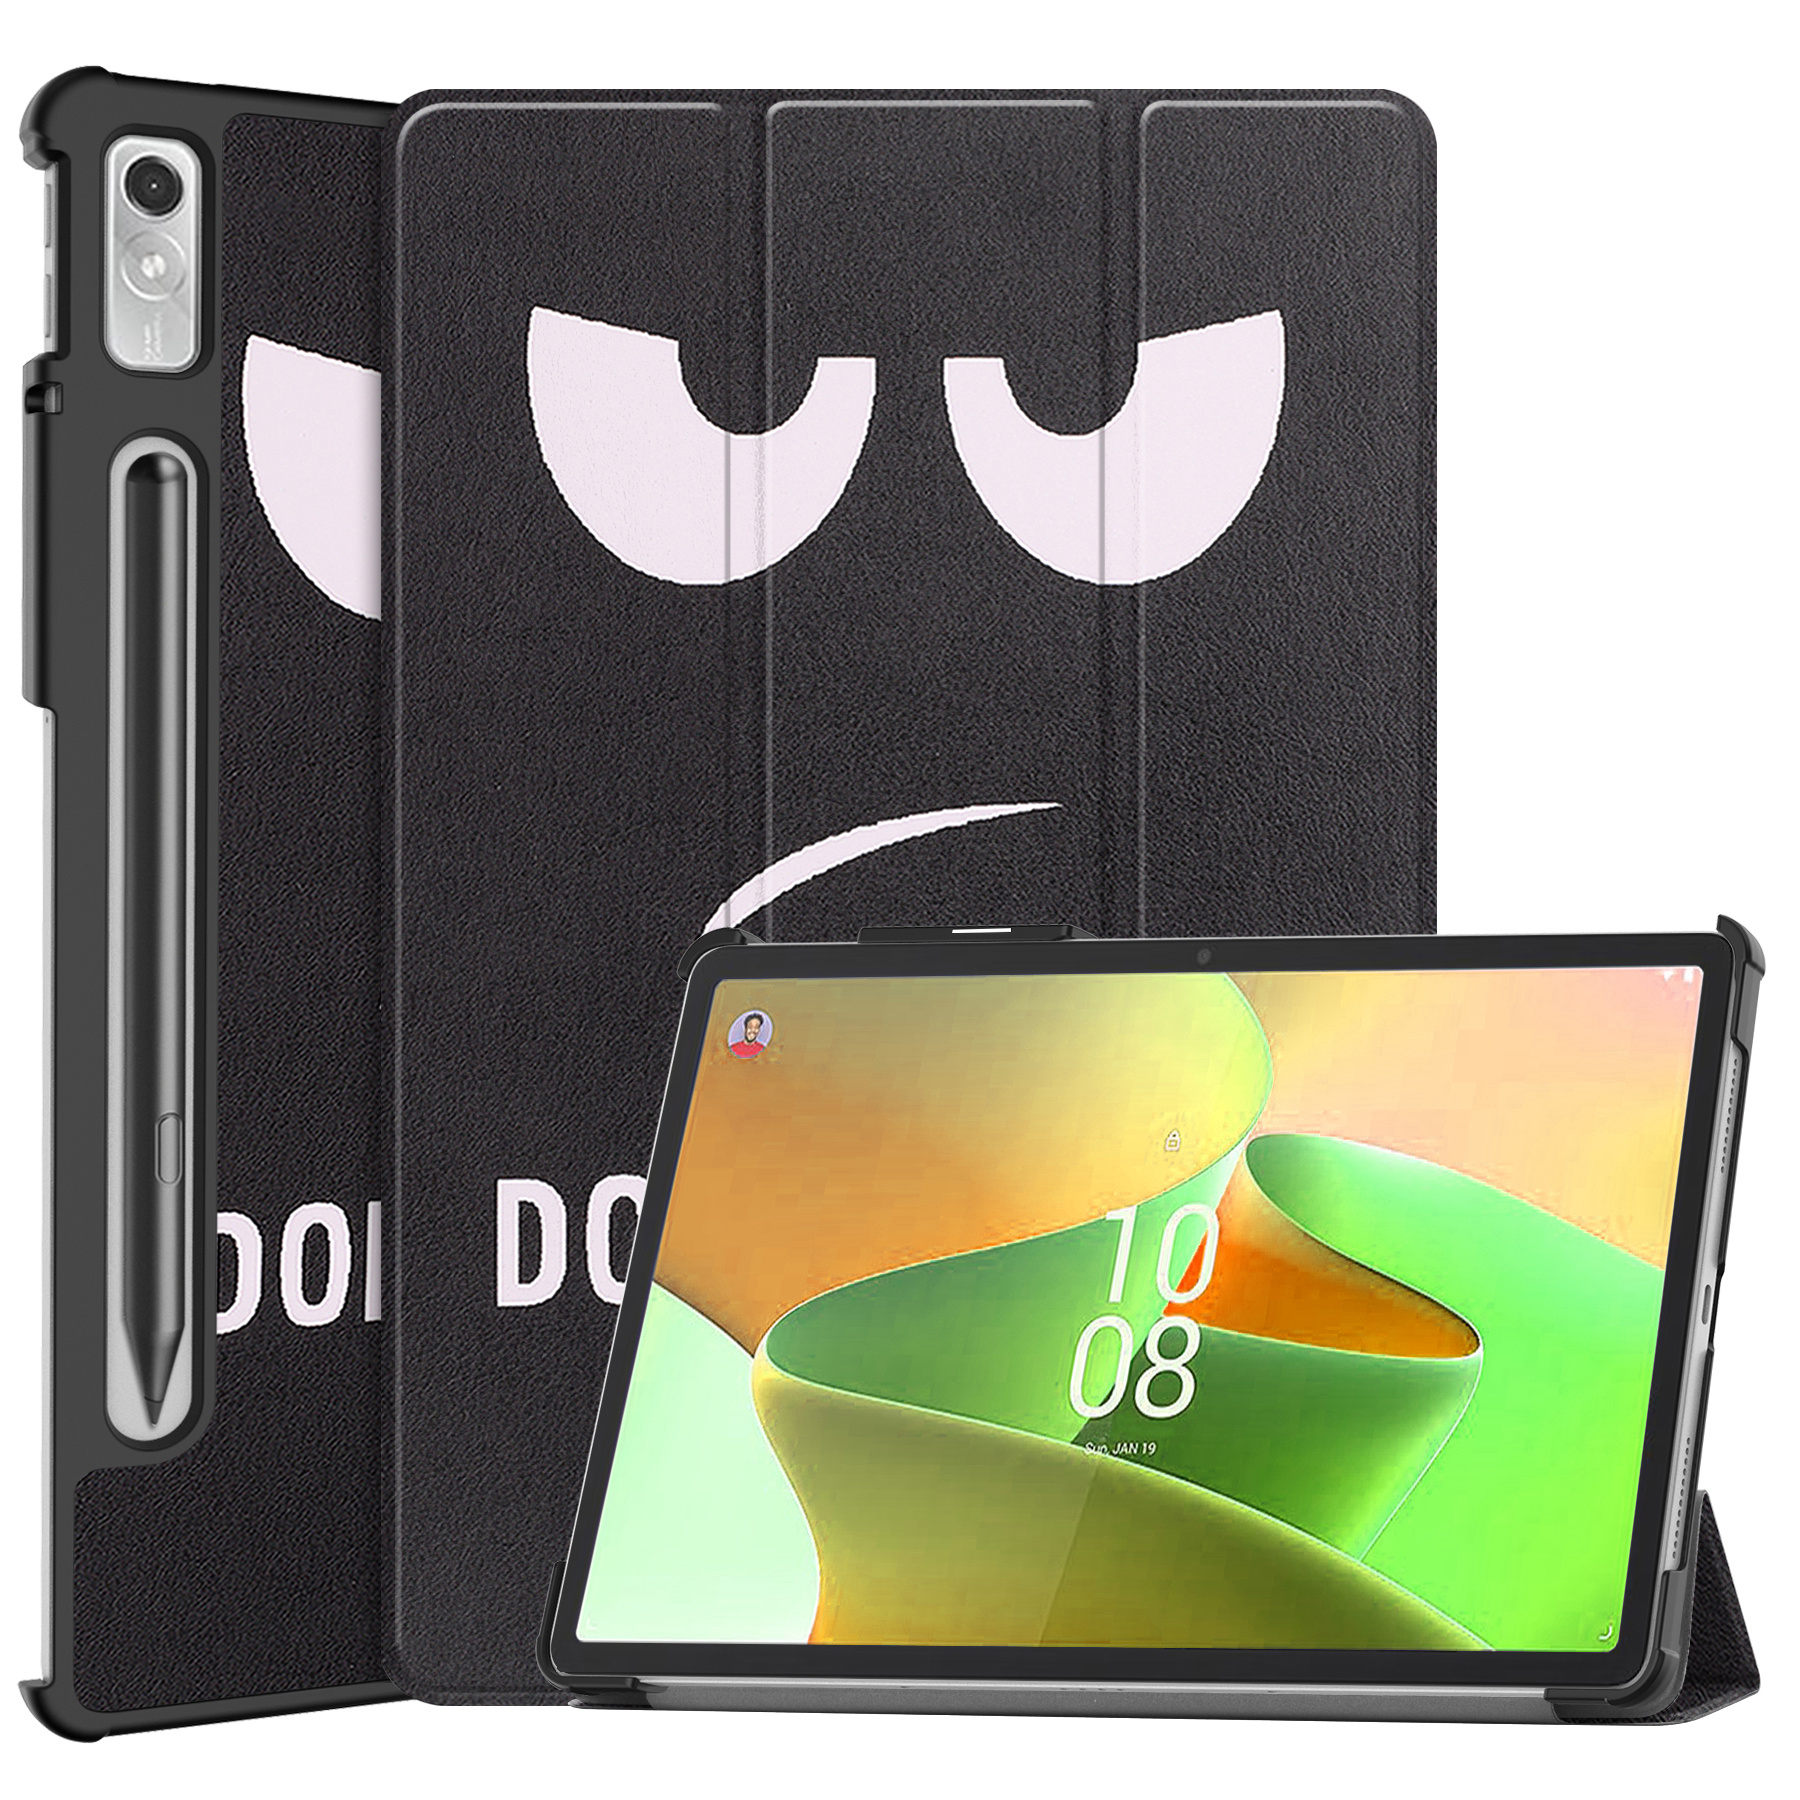 BASEY. Hoesje Geschikt voor Lenovo Tab P11 Pro Hoes Case Tablet Hoesje Tri-fold Met Uitsparing Geschikt voor Lenovo Pen - Hoes Geschikt voor Lenovo Tab P11 Pro Hoesje Hard Cover Bookcase Hoes - Don't Touch Me